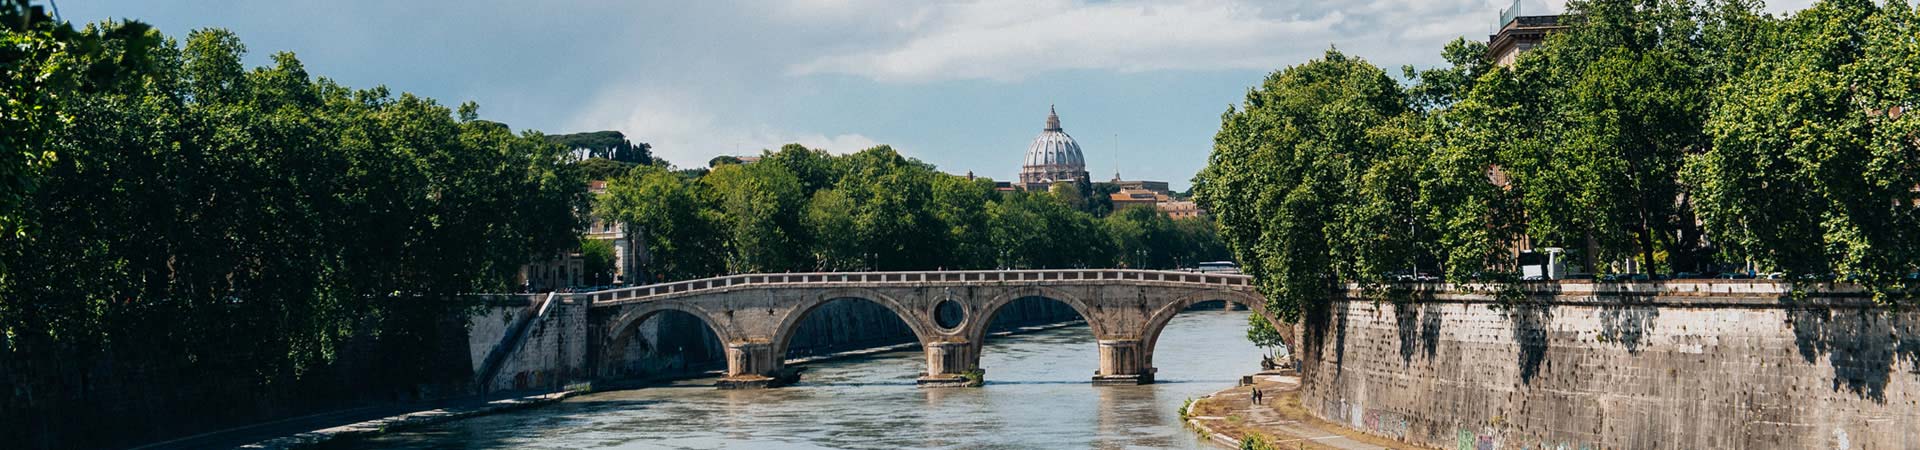 Helpful Information for Visitors | Study Abroad in Rome